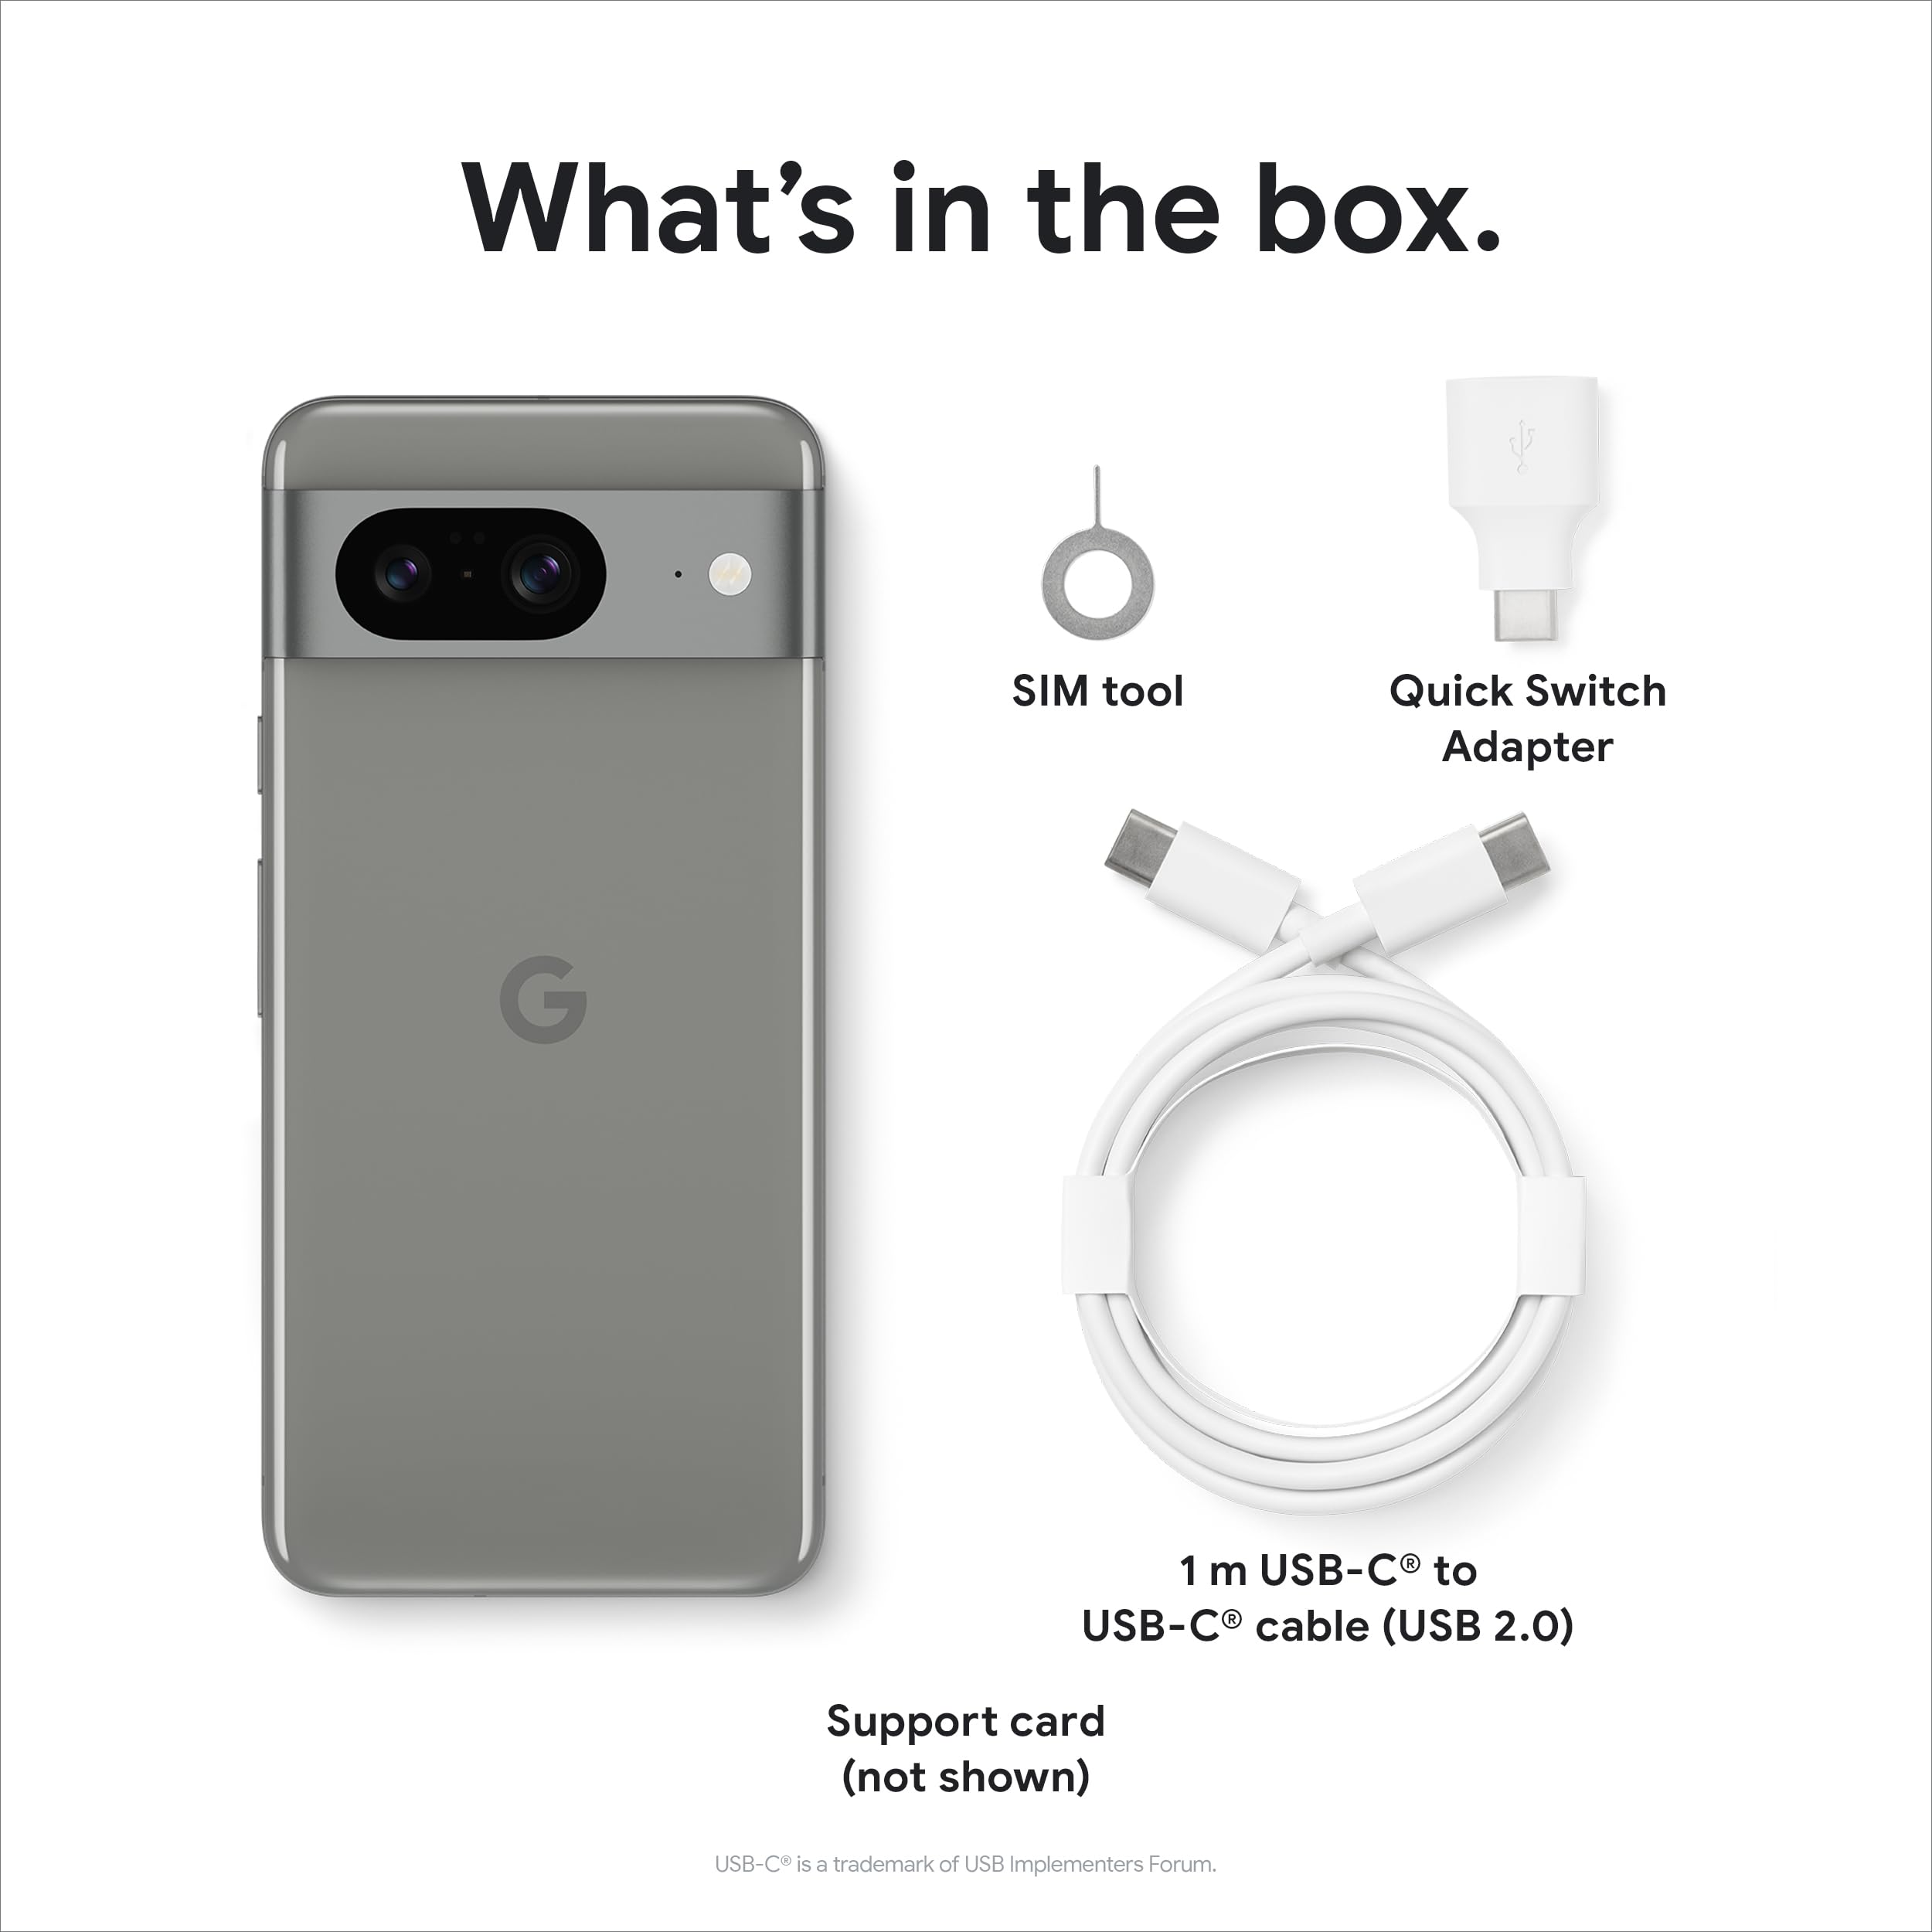 Google Pixel 8 - Unlocked Android Smartphone with Advanced Pixel Camera, 24-Hour Battery, and Powerful Security - Obsidian - 128 GB